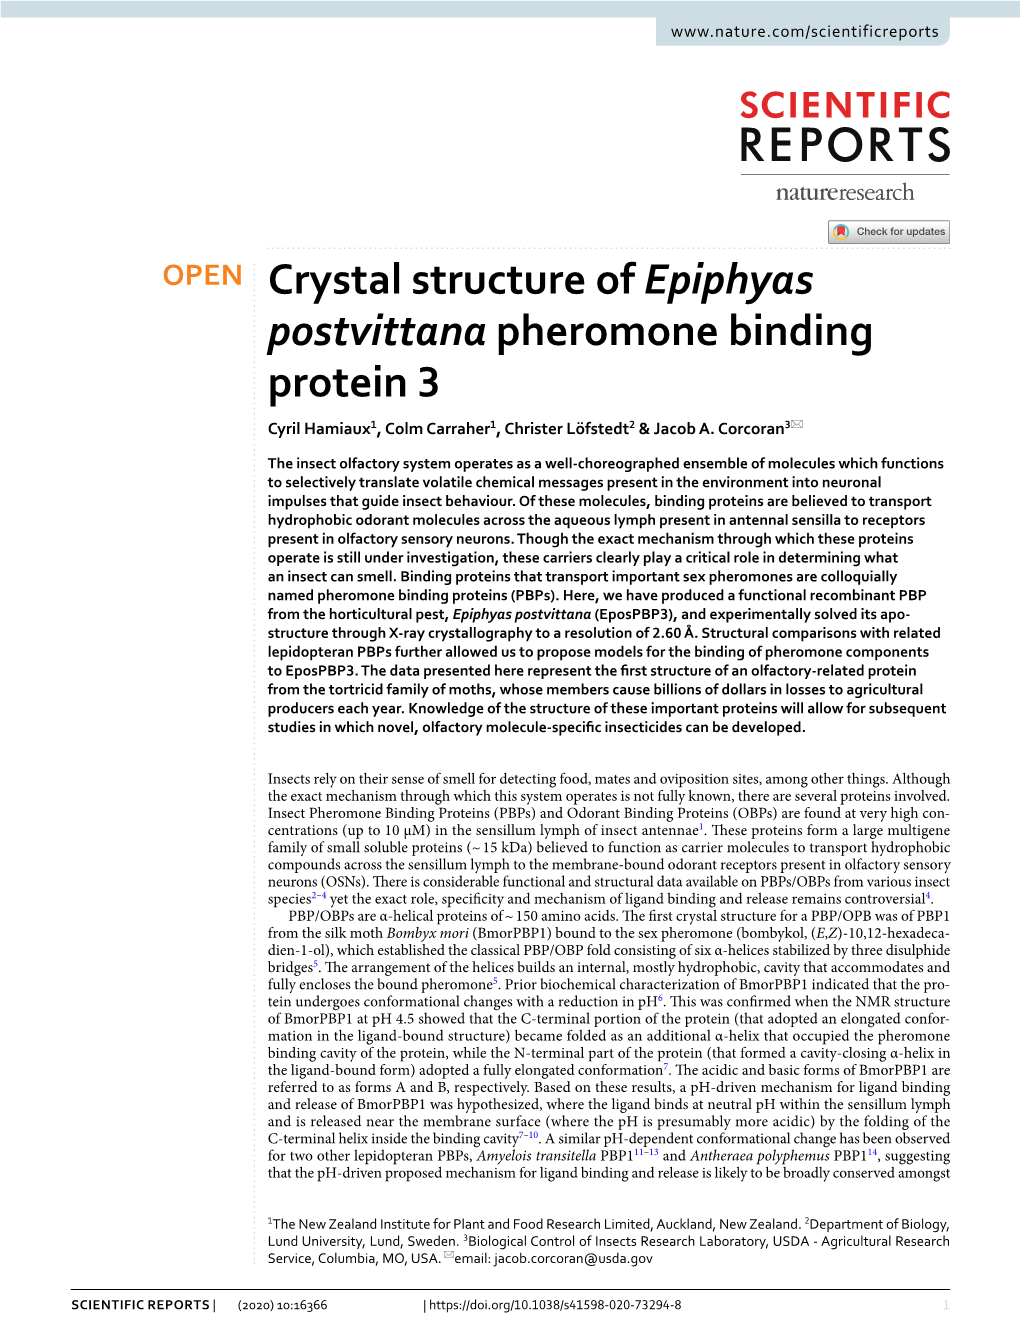 Crystal Structure of Epiphyas Postvittana Pheromone Binding Protein 3 Cyril Hamiaux1, Colm Carraher1, Christer Löfstedt2 & Jacob A